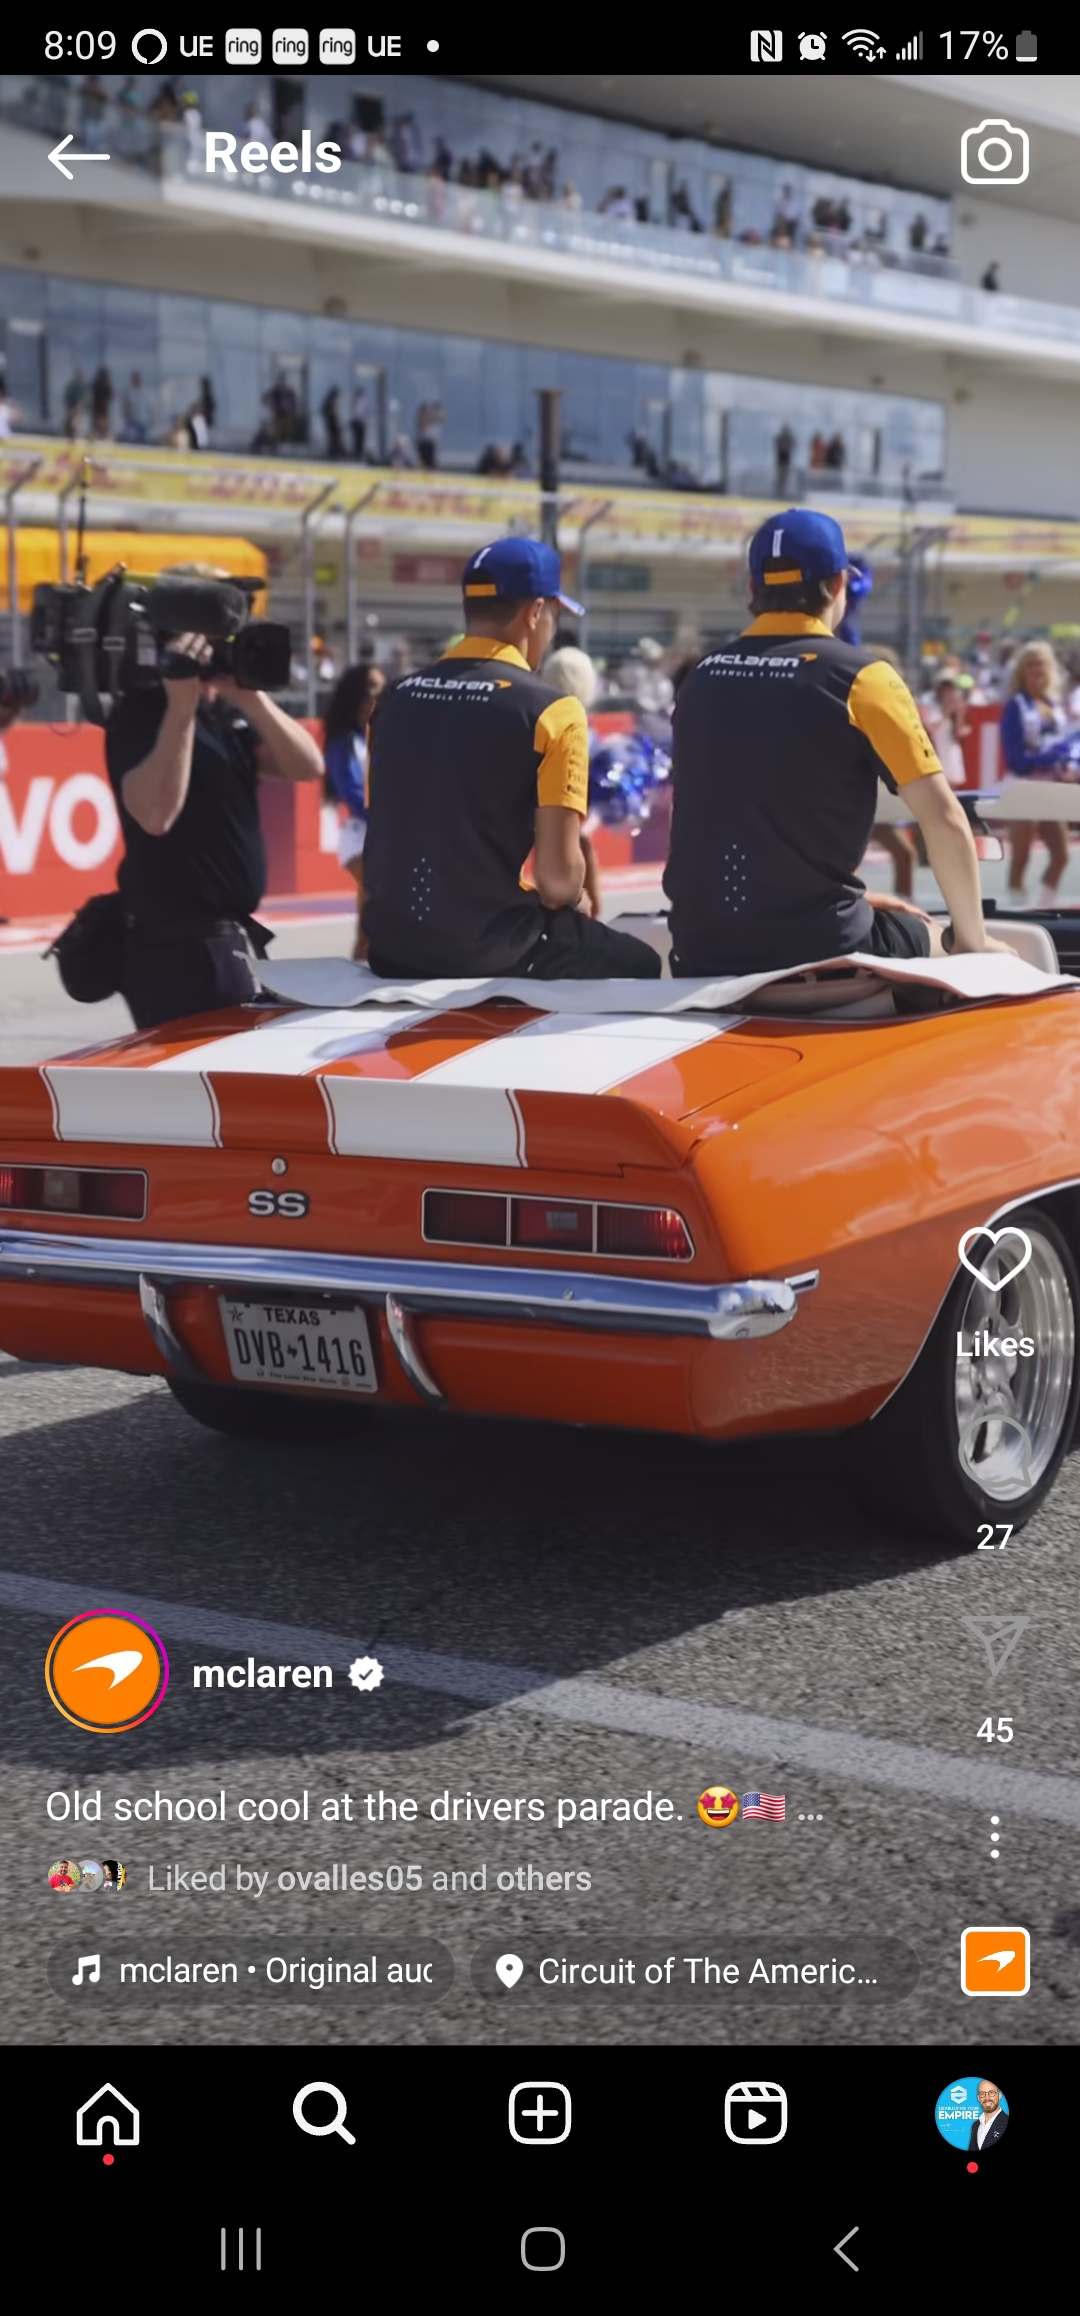 Two individuals in racing team apparel sitting on the back of a classic orange muscle car in a parade setting, discussing their next real estate chat.